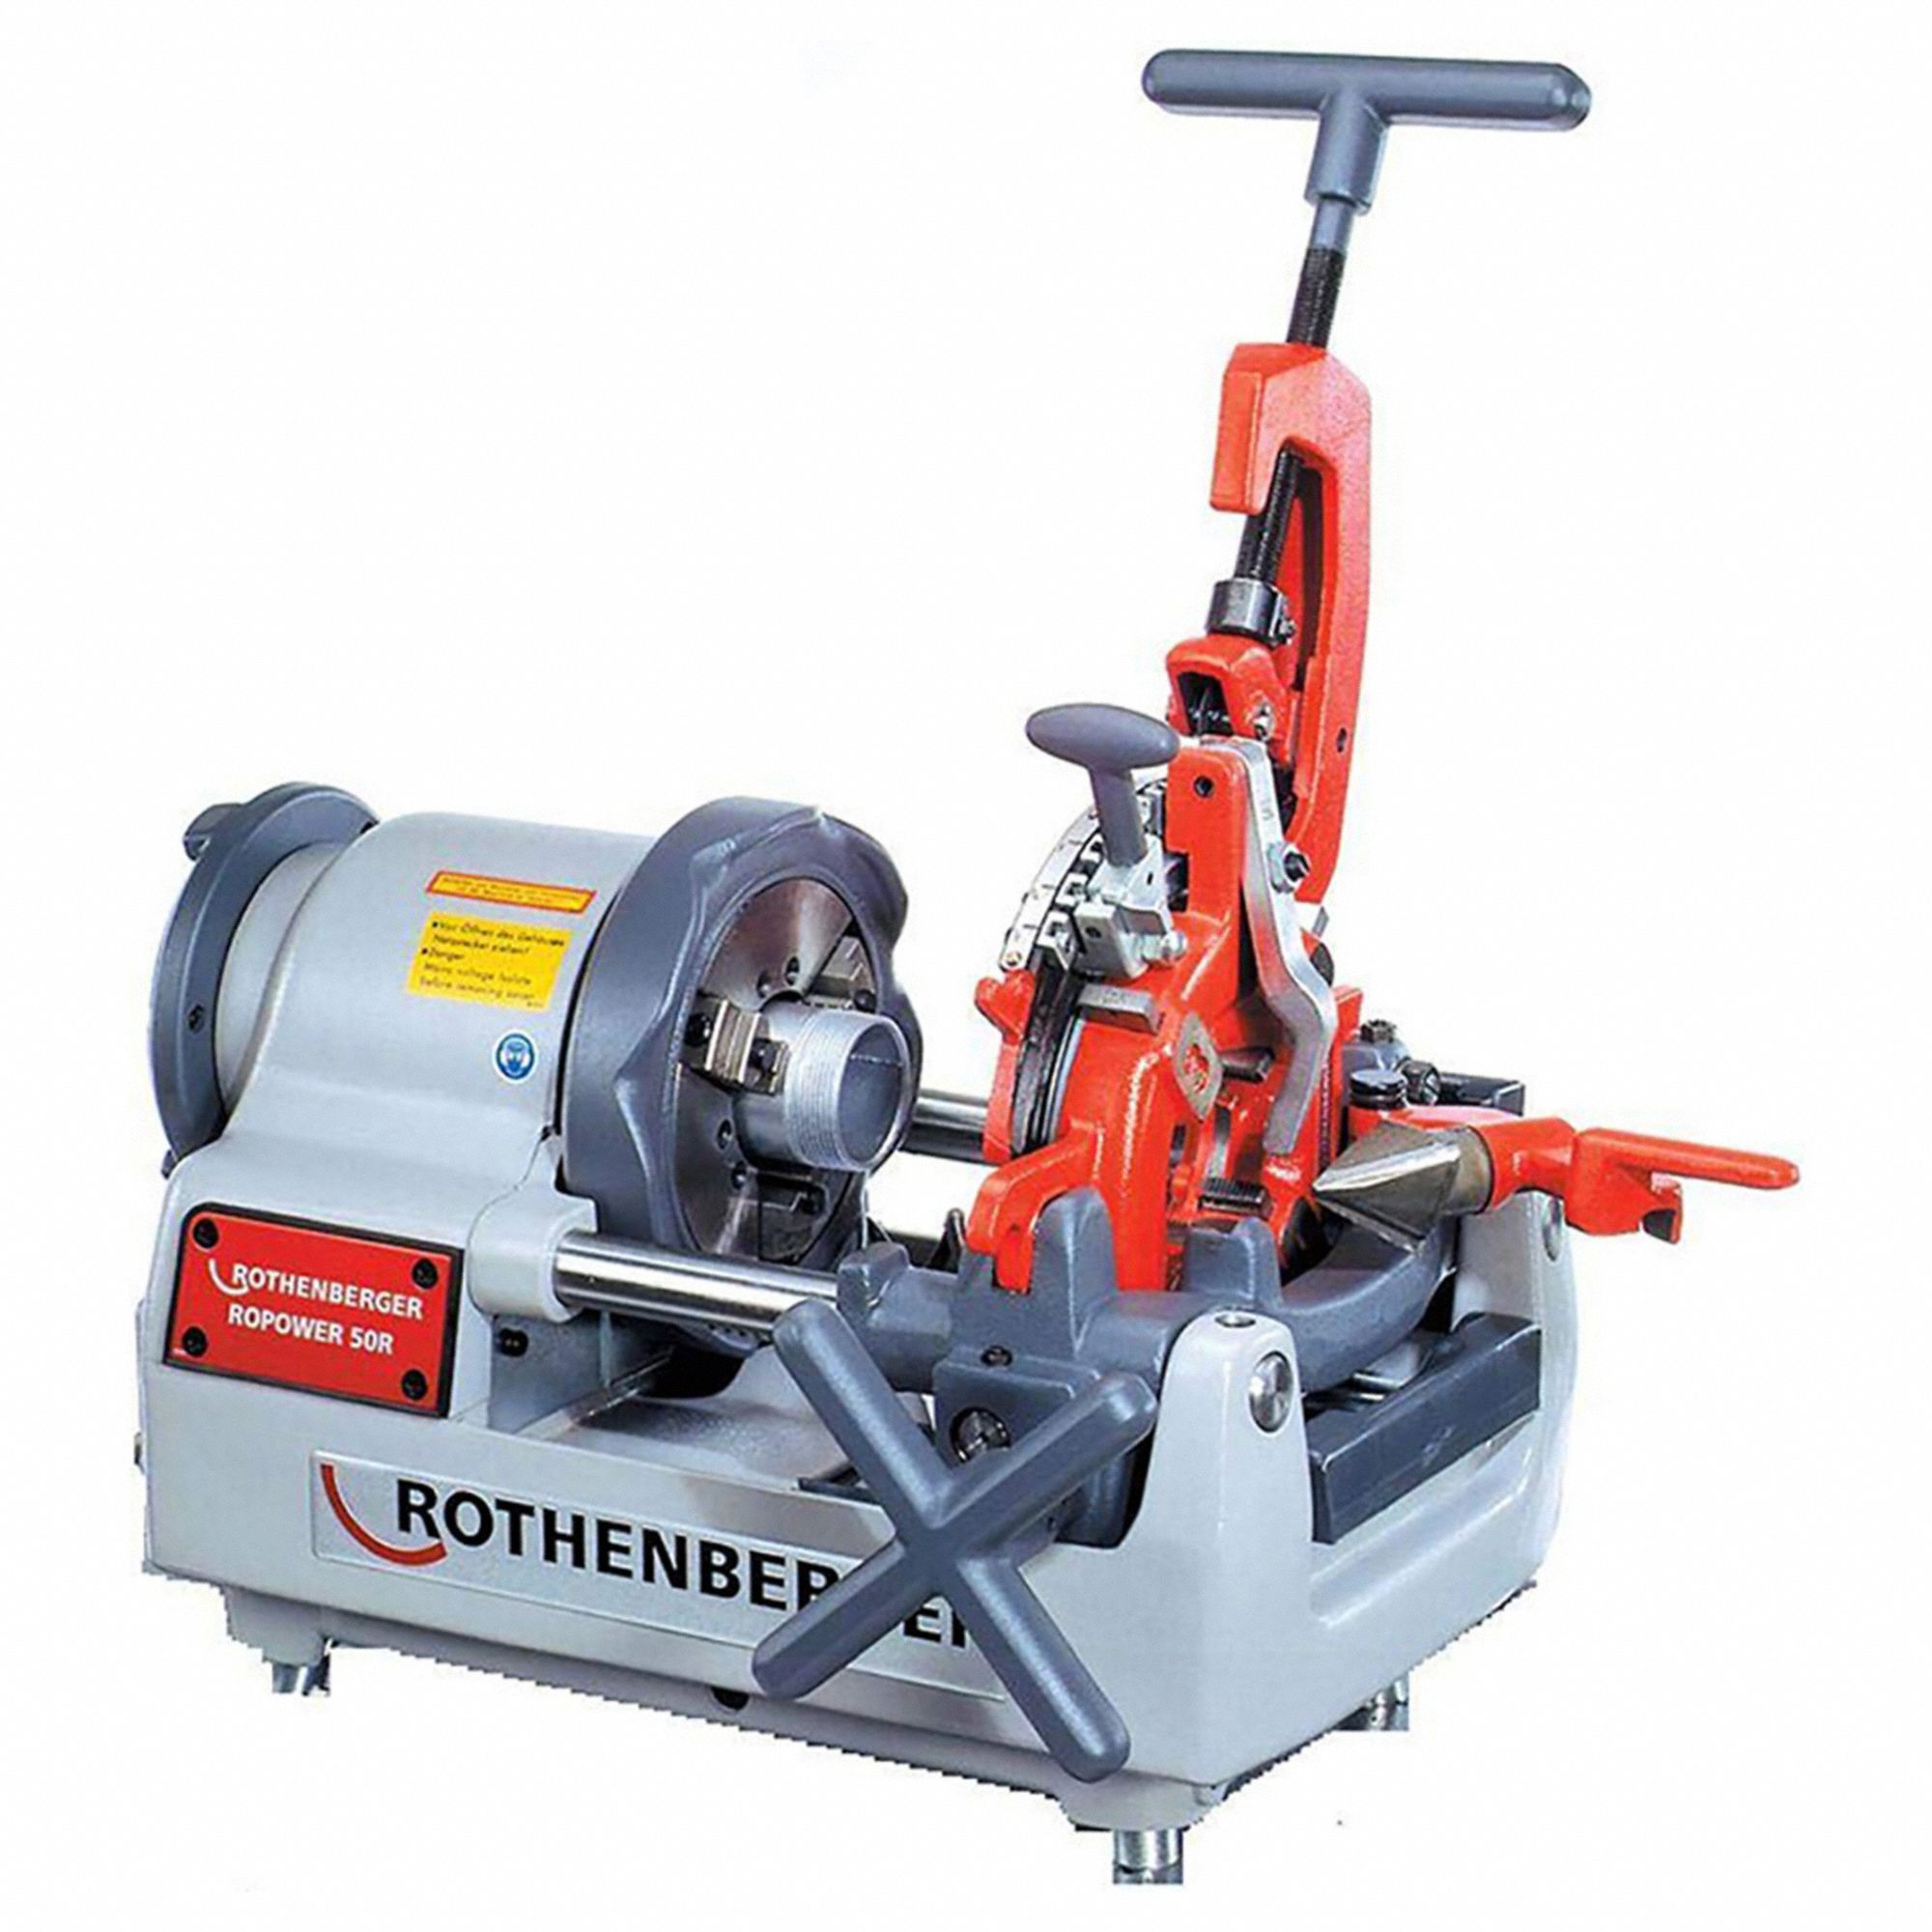 ROTHENBERGER Portable Pipe Threading Machine: Ropower 50R, For 1/2 in to 2  in Pipe, 1 hp, 1 Speed